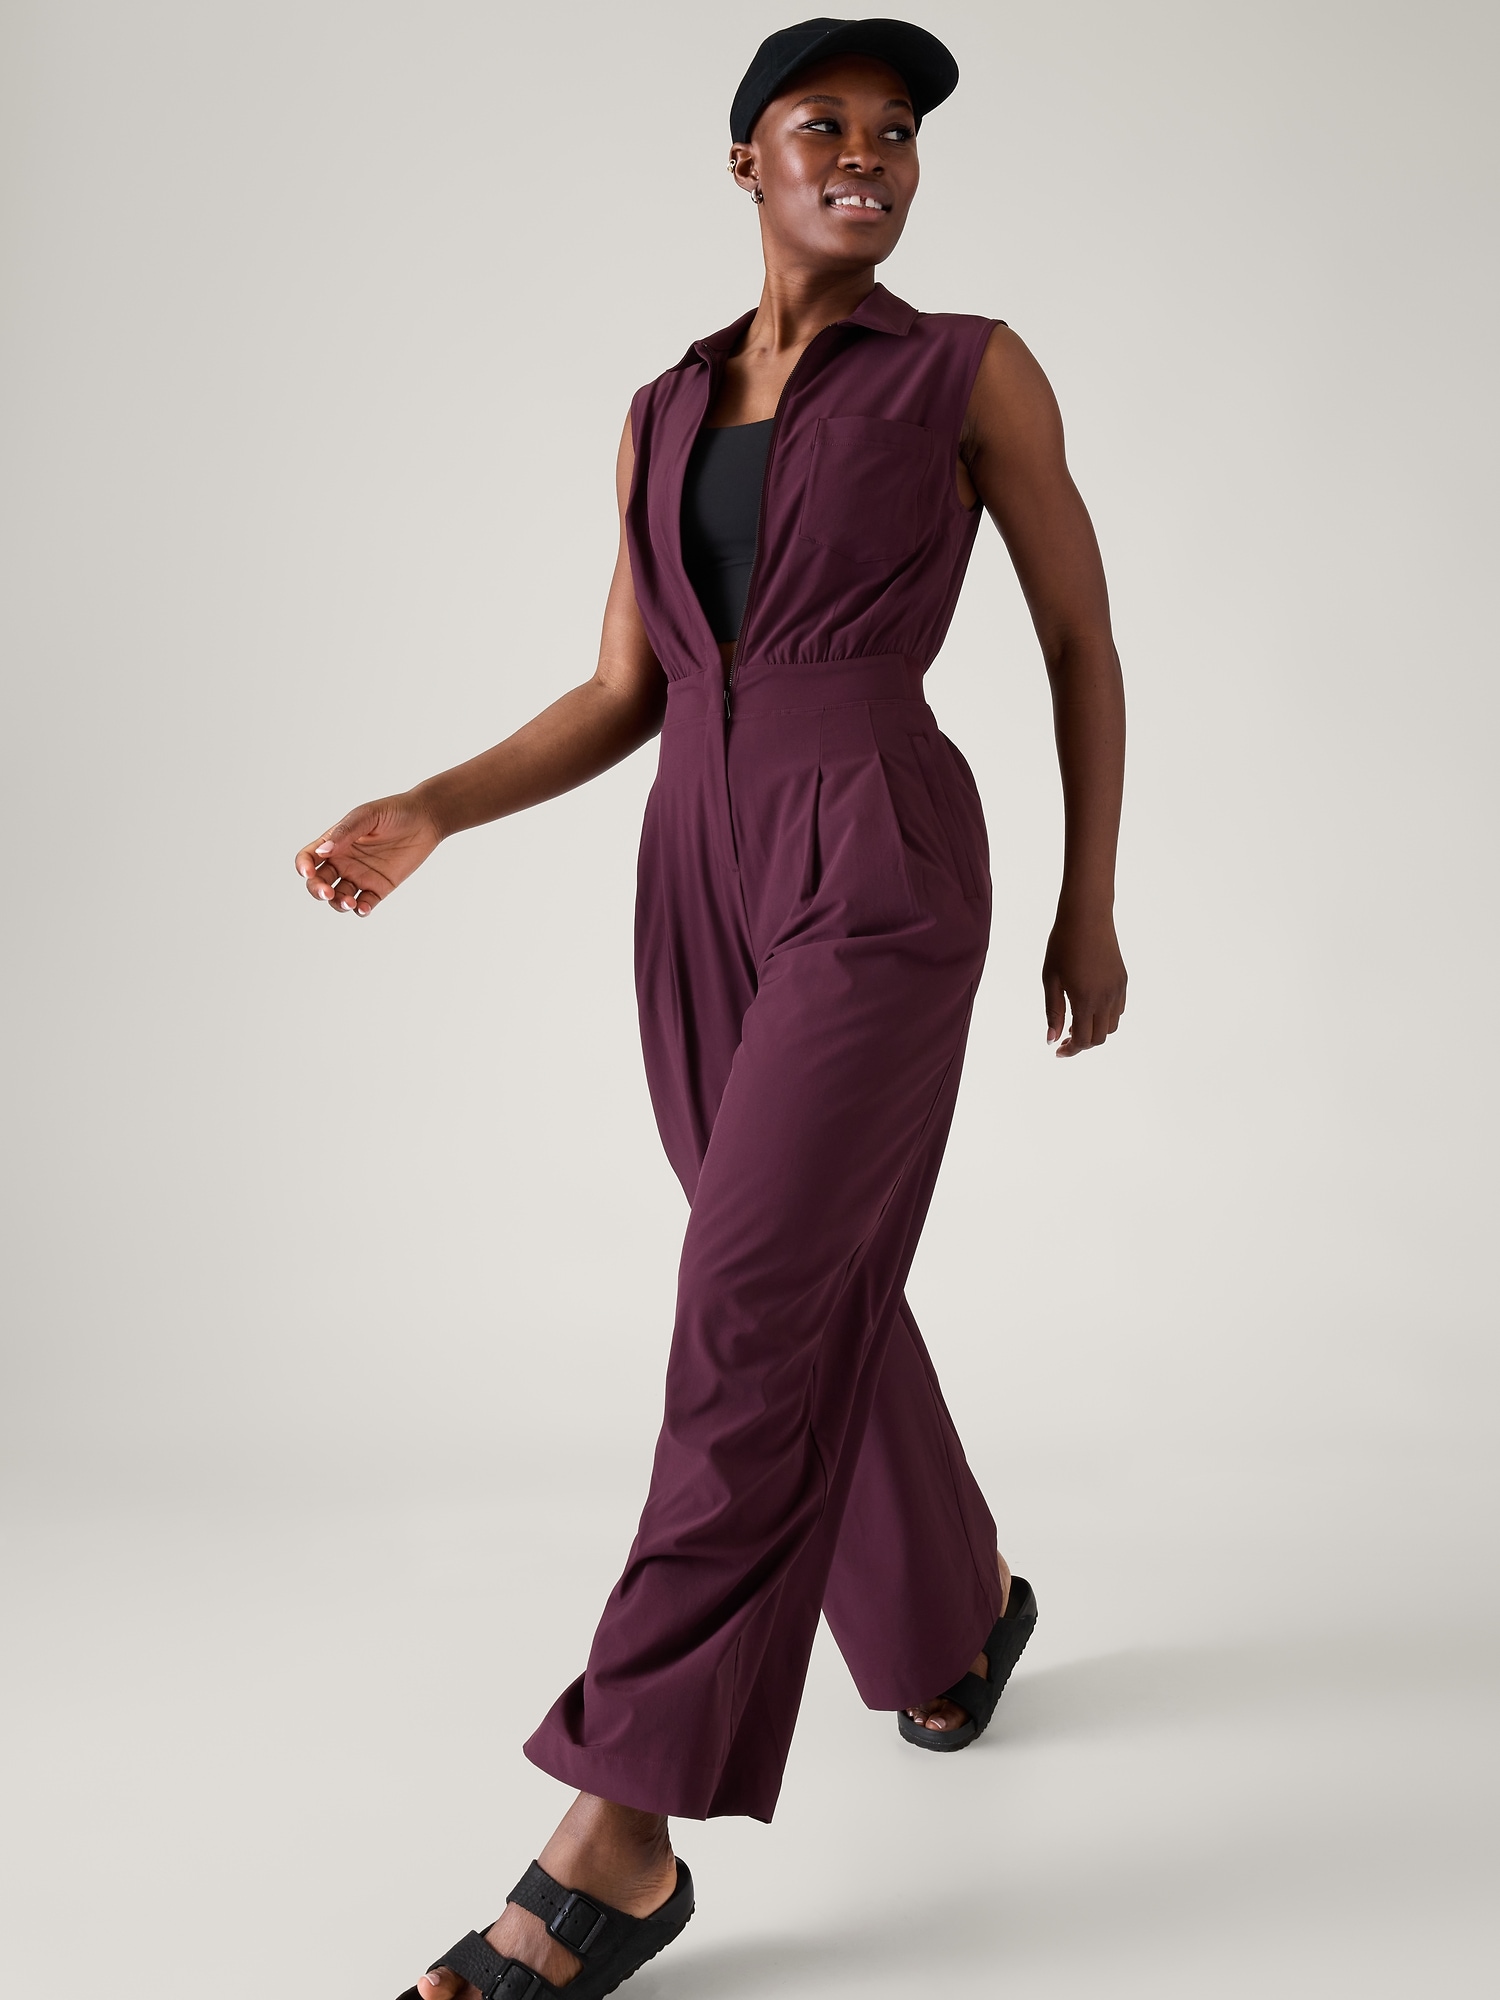 Athleisure Jumpsuits & Rompers for Women